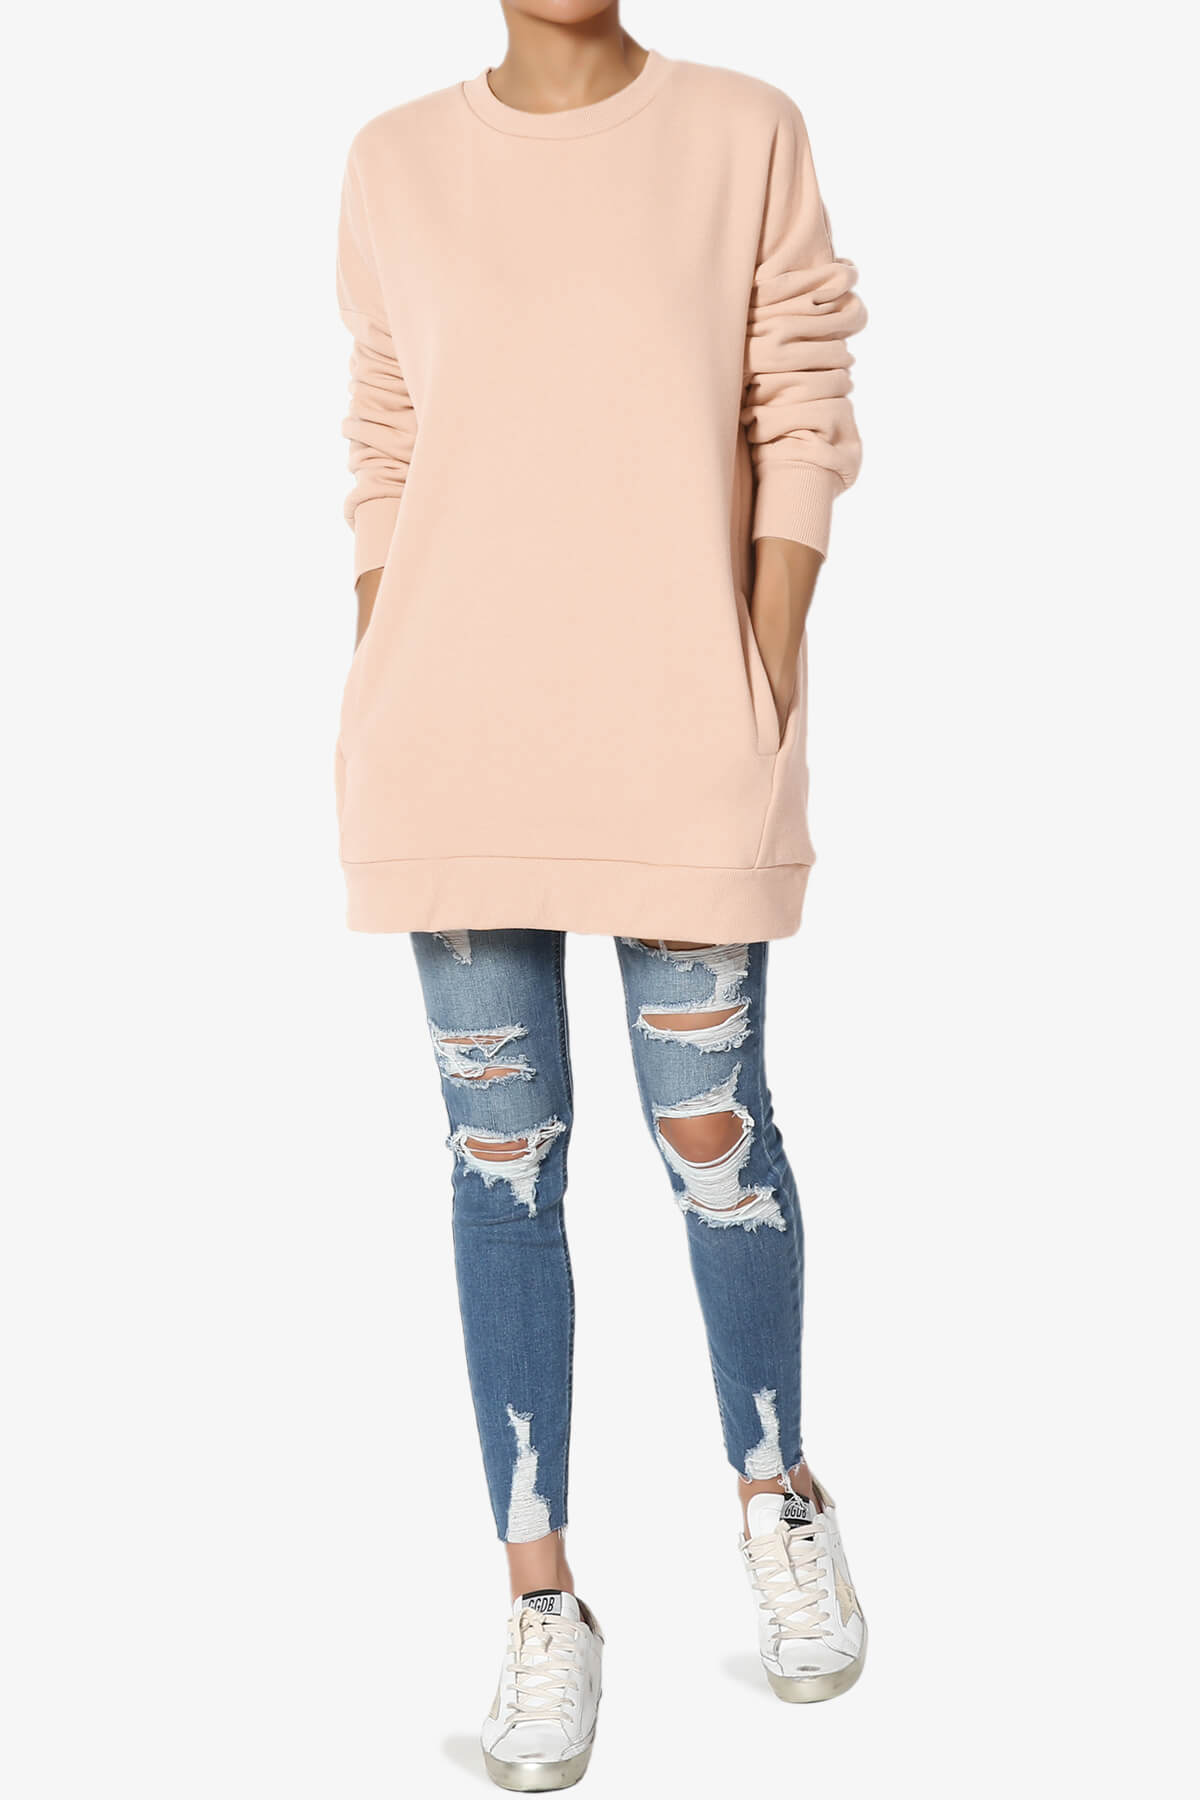 Load image into Gallery viewer, Accie Crew Neck Pullover Sweatshirts LT PEACH_6
